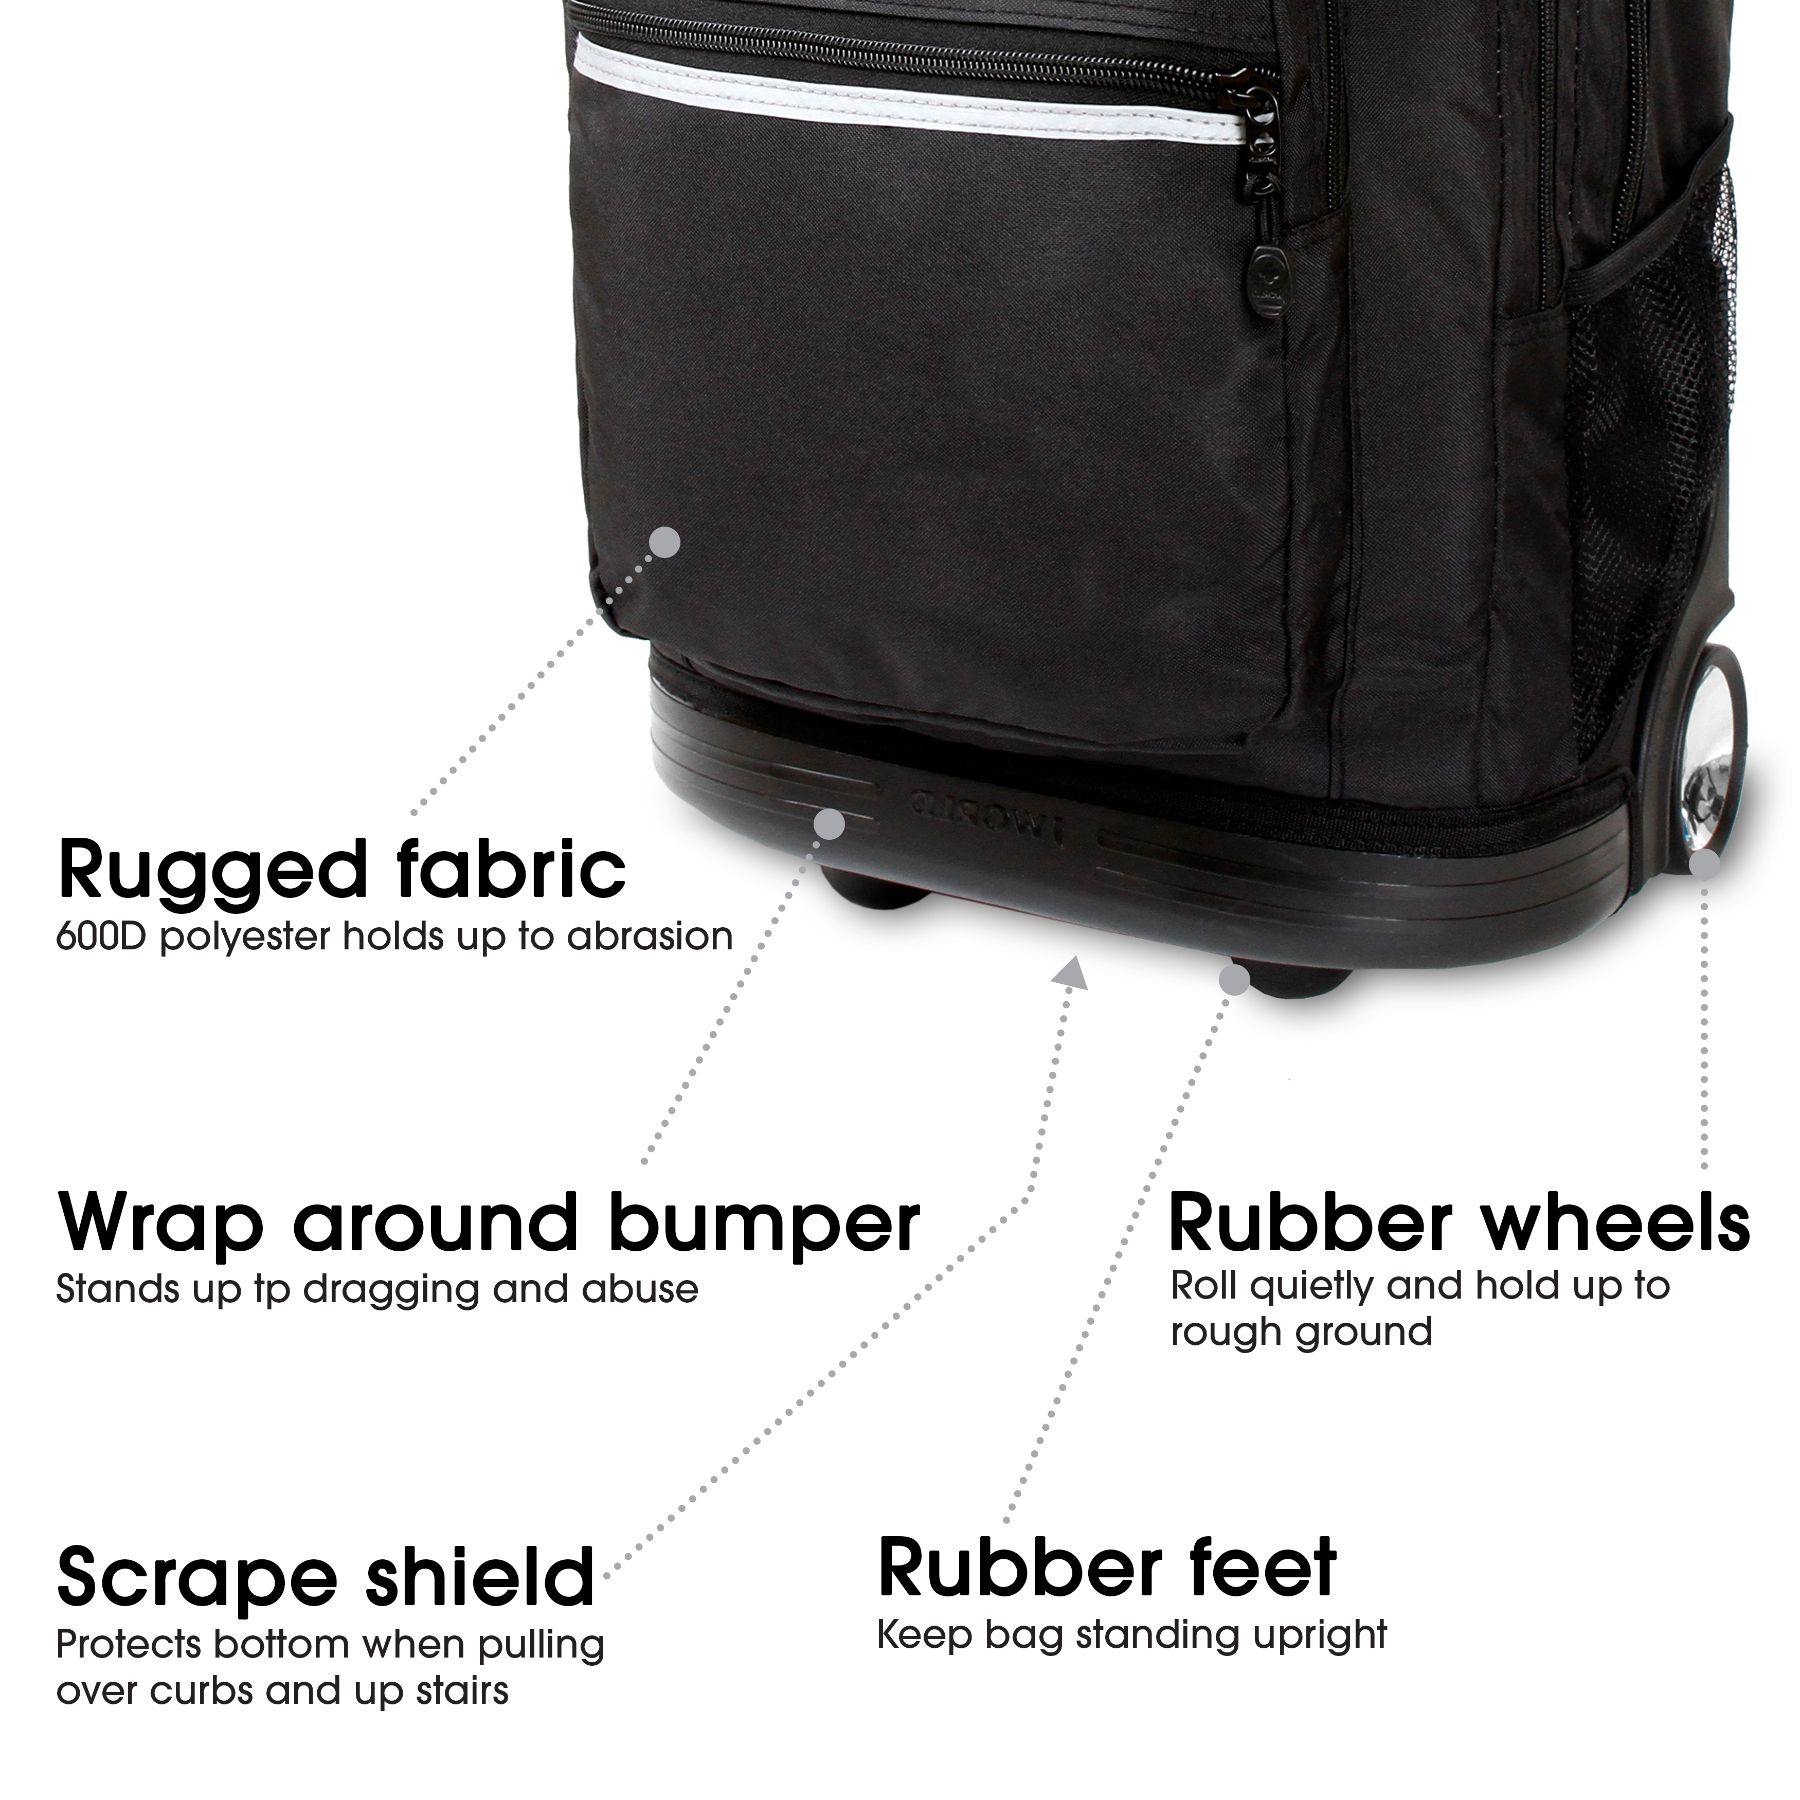 J World Unisex Sundance 20" Rolling Backpack with Laptop Sleeve for School and Travel, Black - image 5 of 5